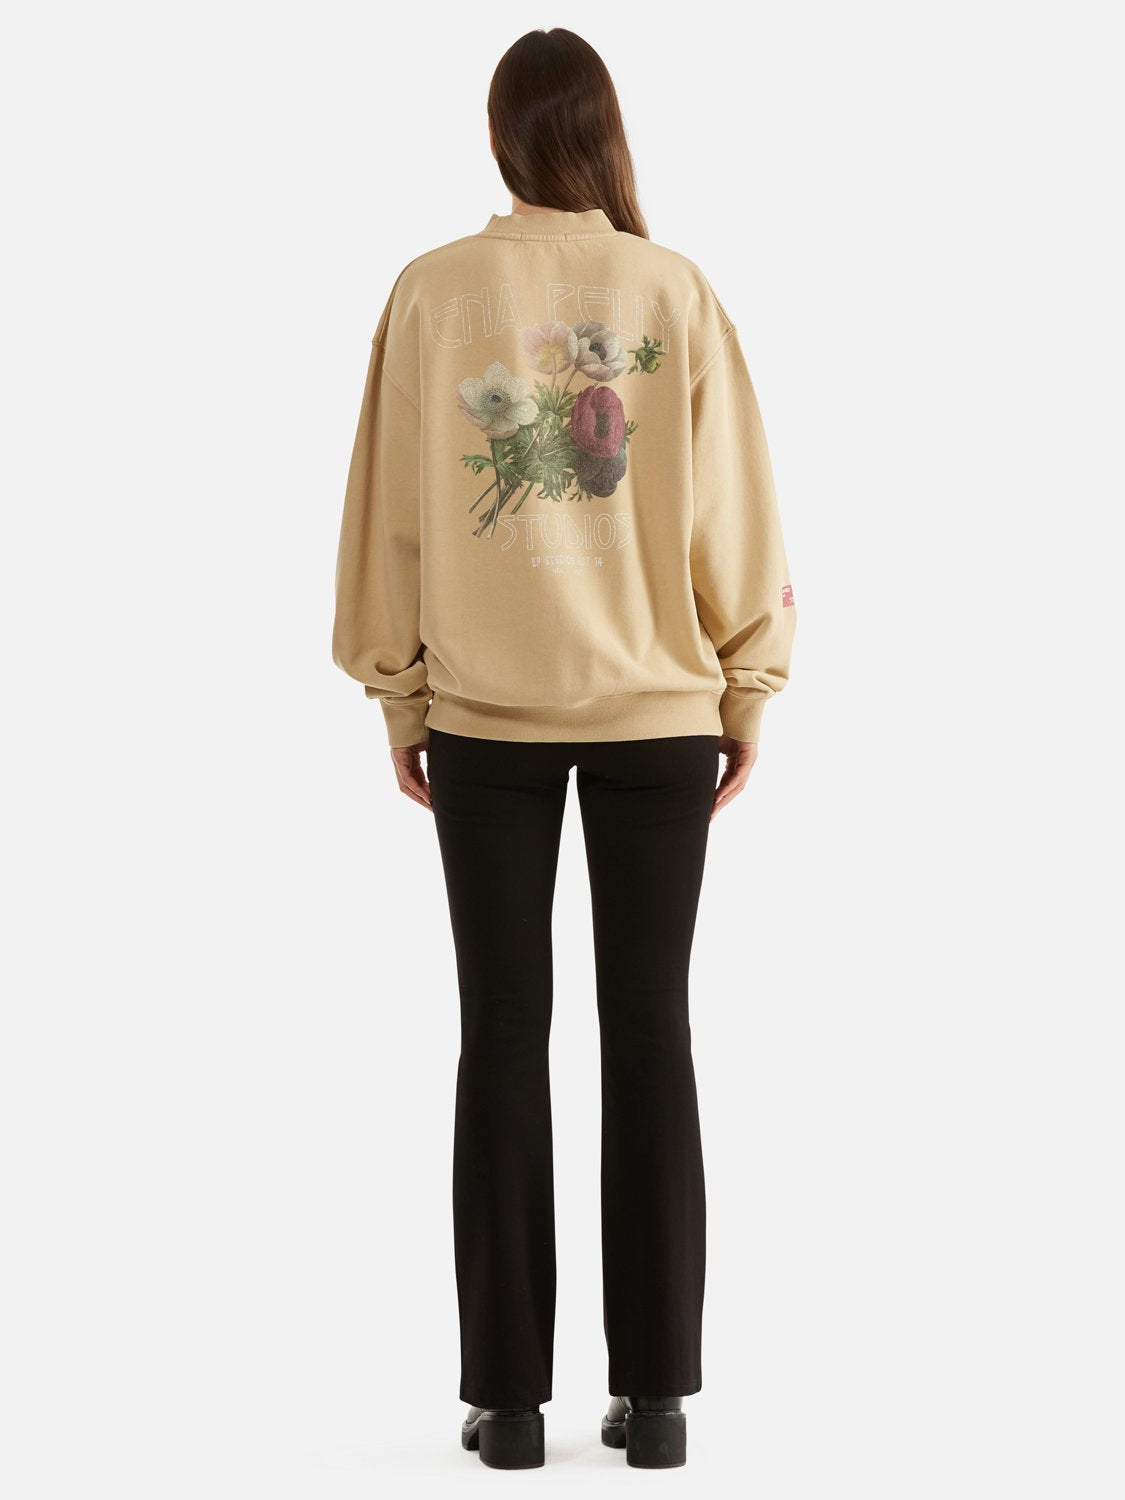 Chloe Oversized Sweater Sunflower - Biscuit